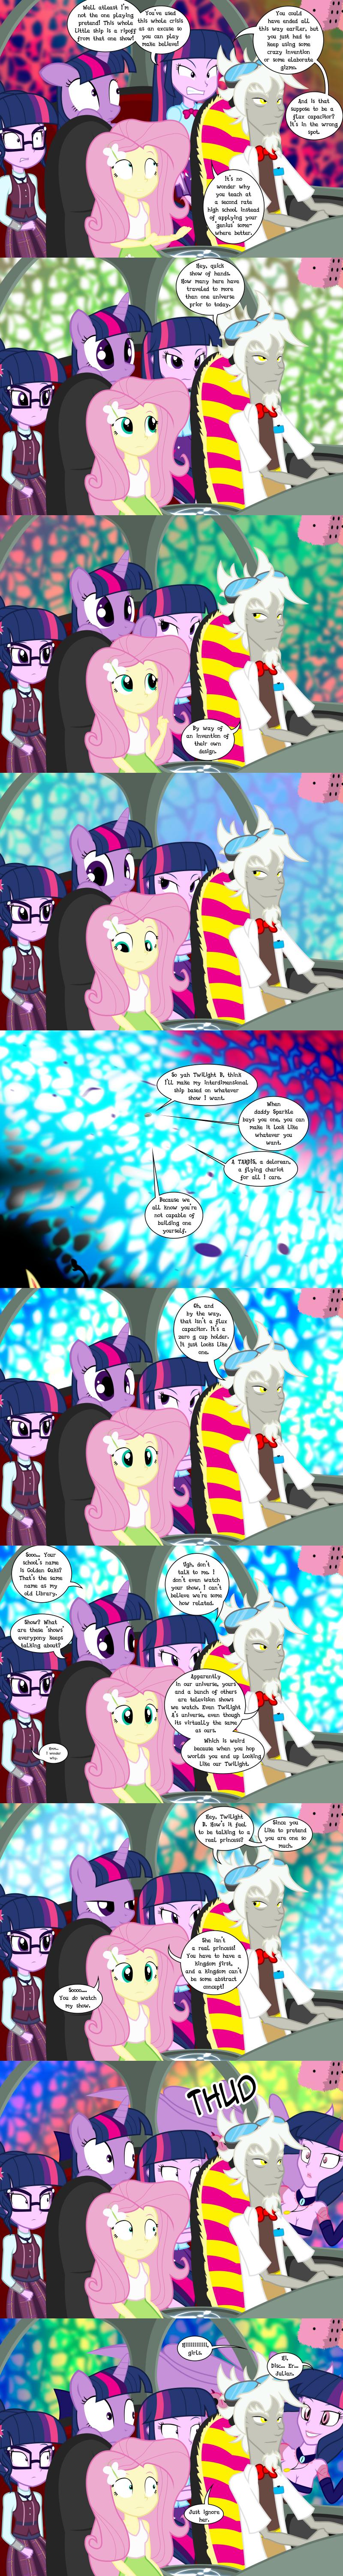 Page 22 - Part 2